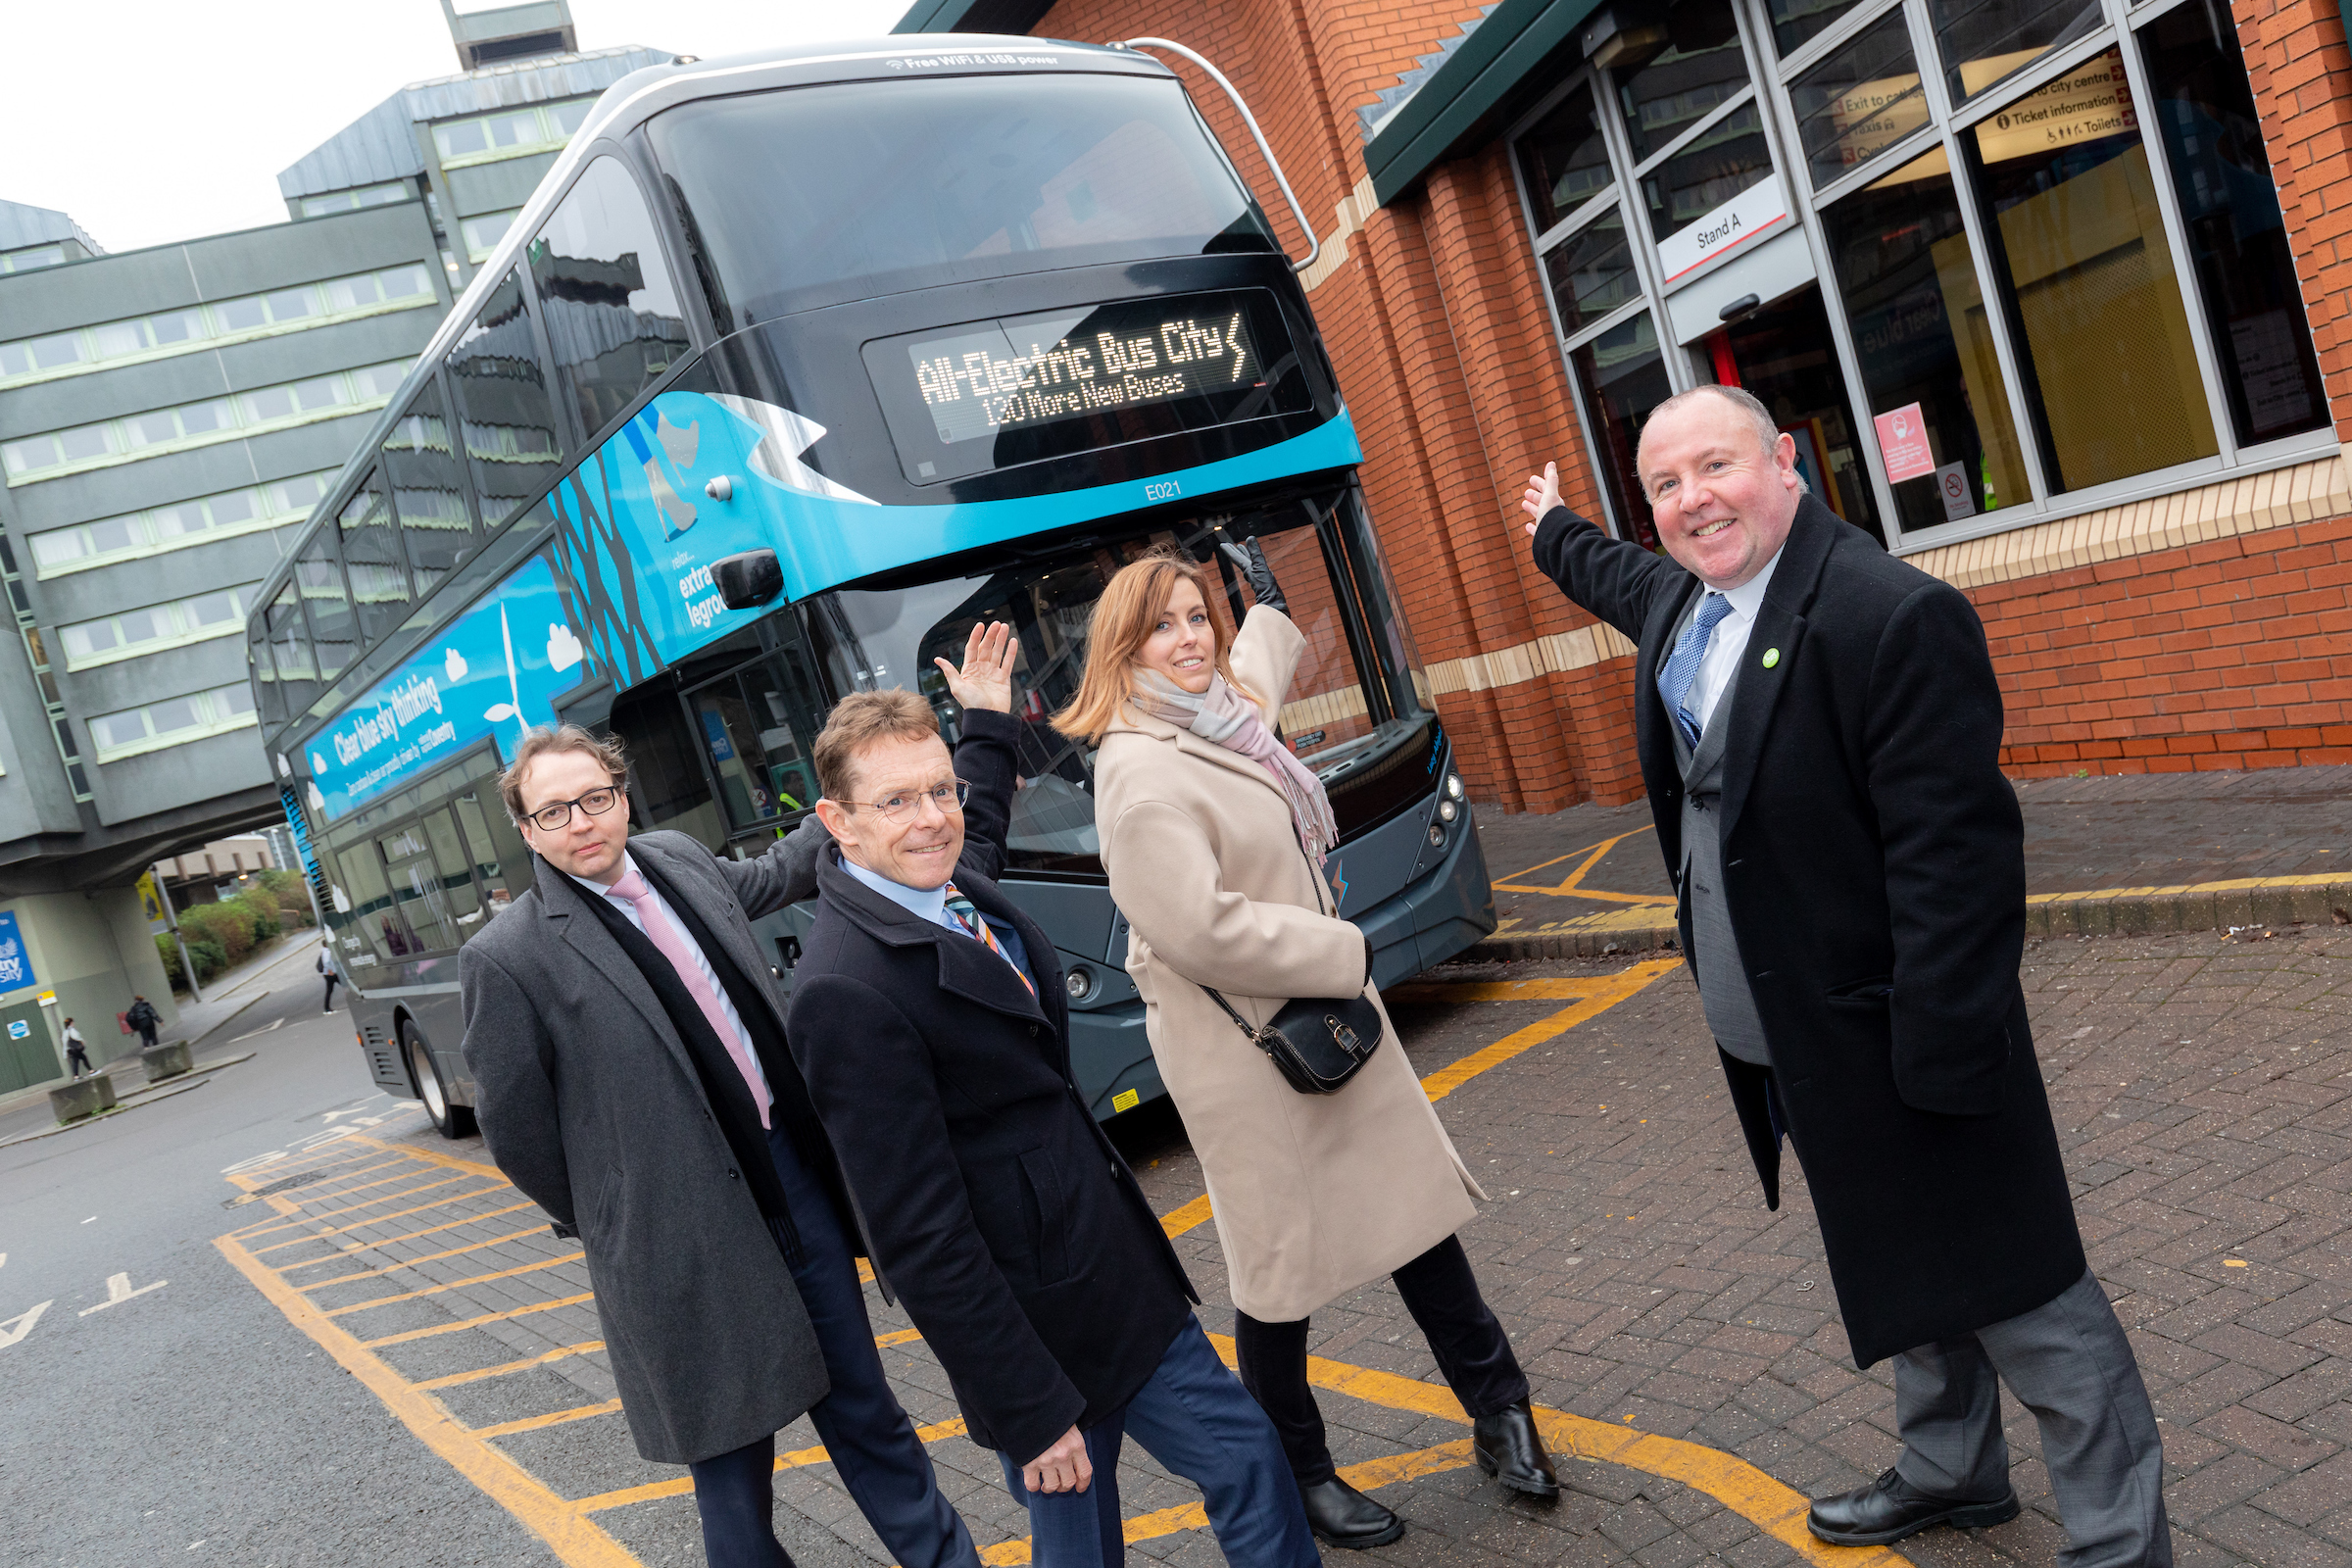 From left: David Bradford (National Express), Mayor of the West Midlands Andy Street, Agata Litwinowicz-Soltysiak (National Express) and Cllr Jim O'Boyle (Coventry City Council)